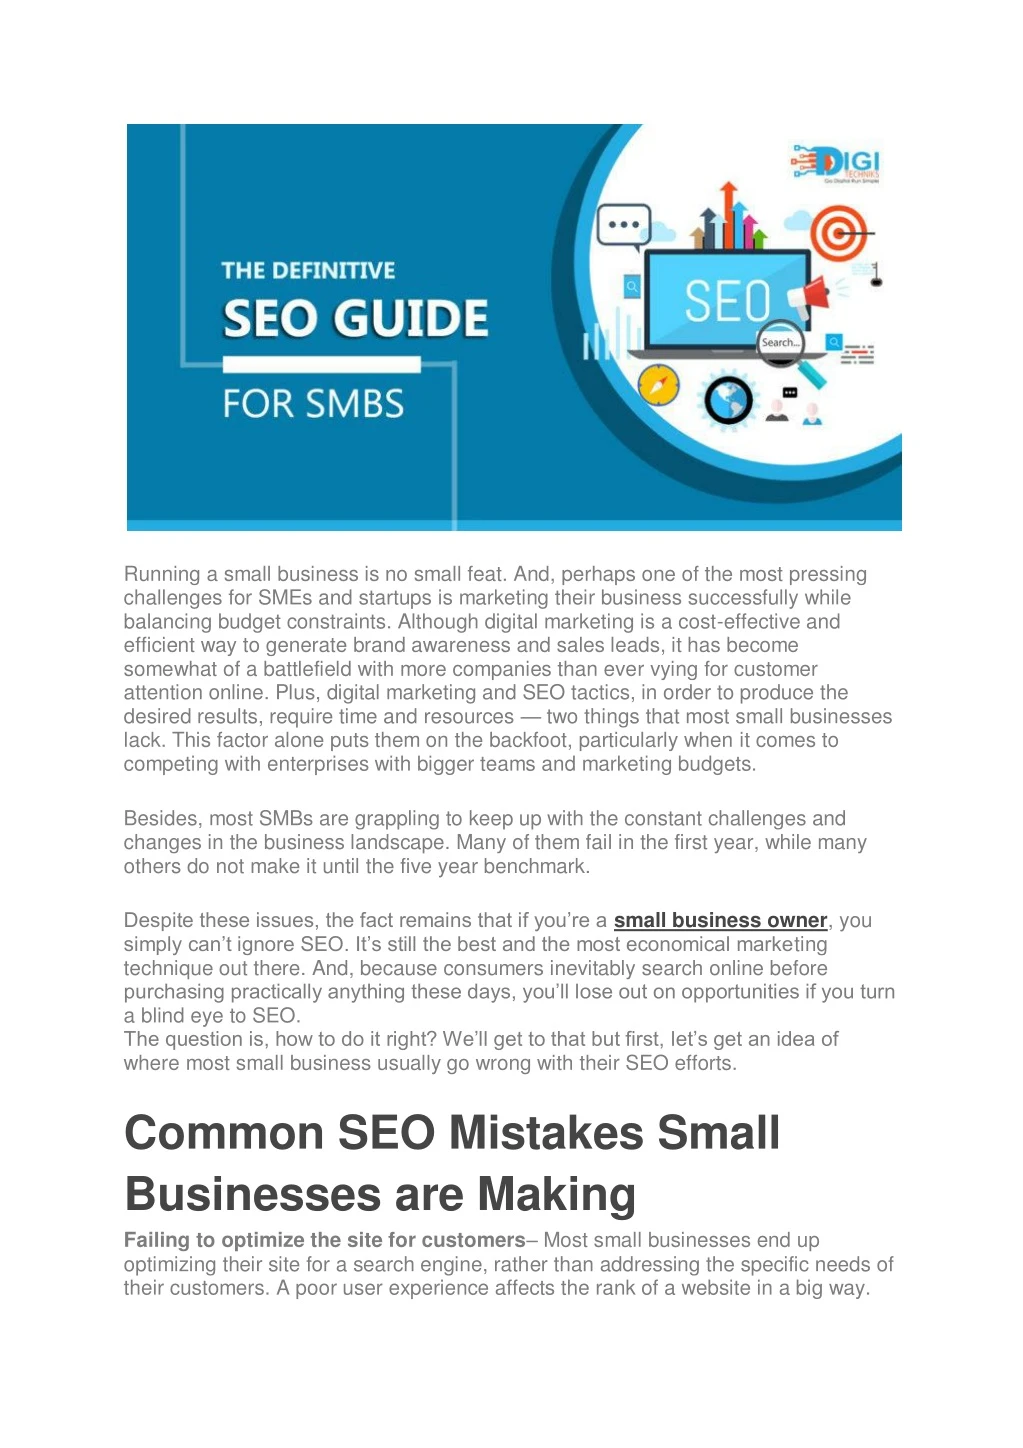 The Definitive SEO Guide to Growing Small and Medium Businesses